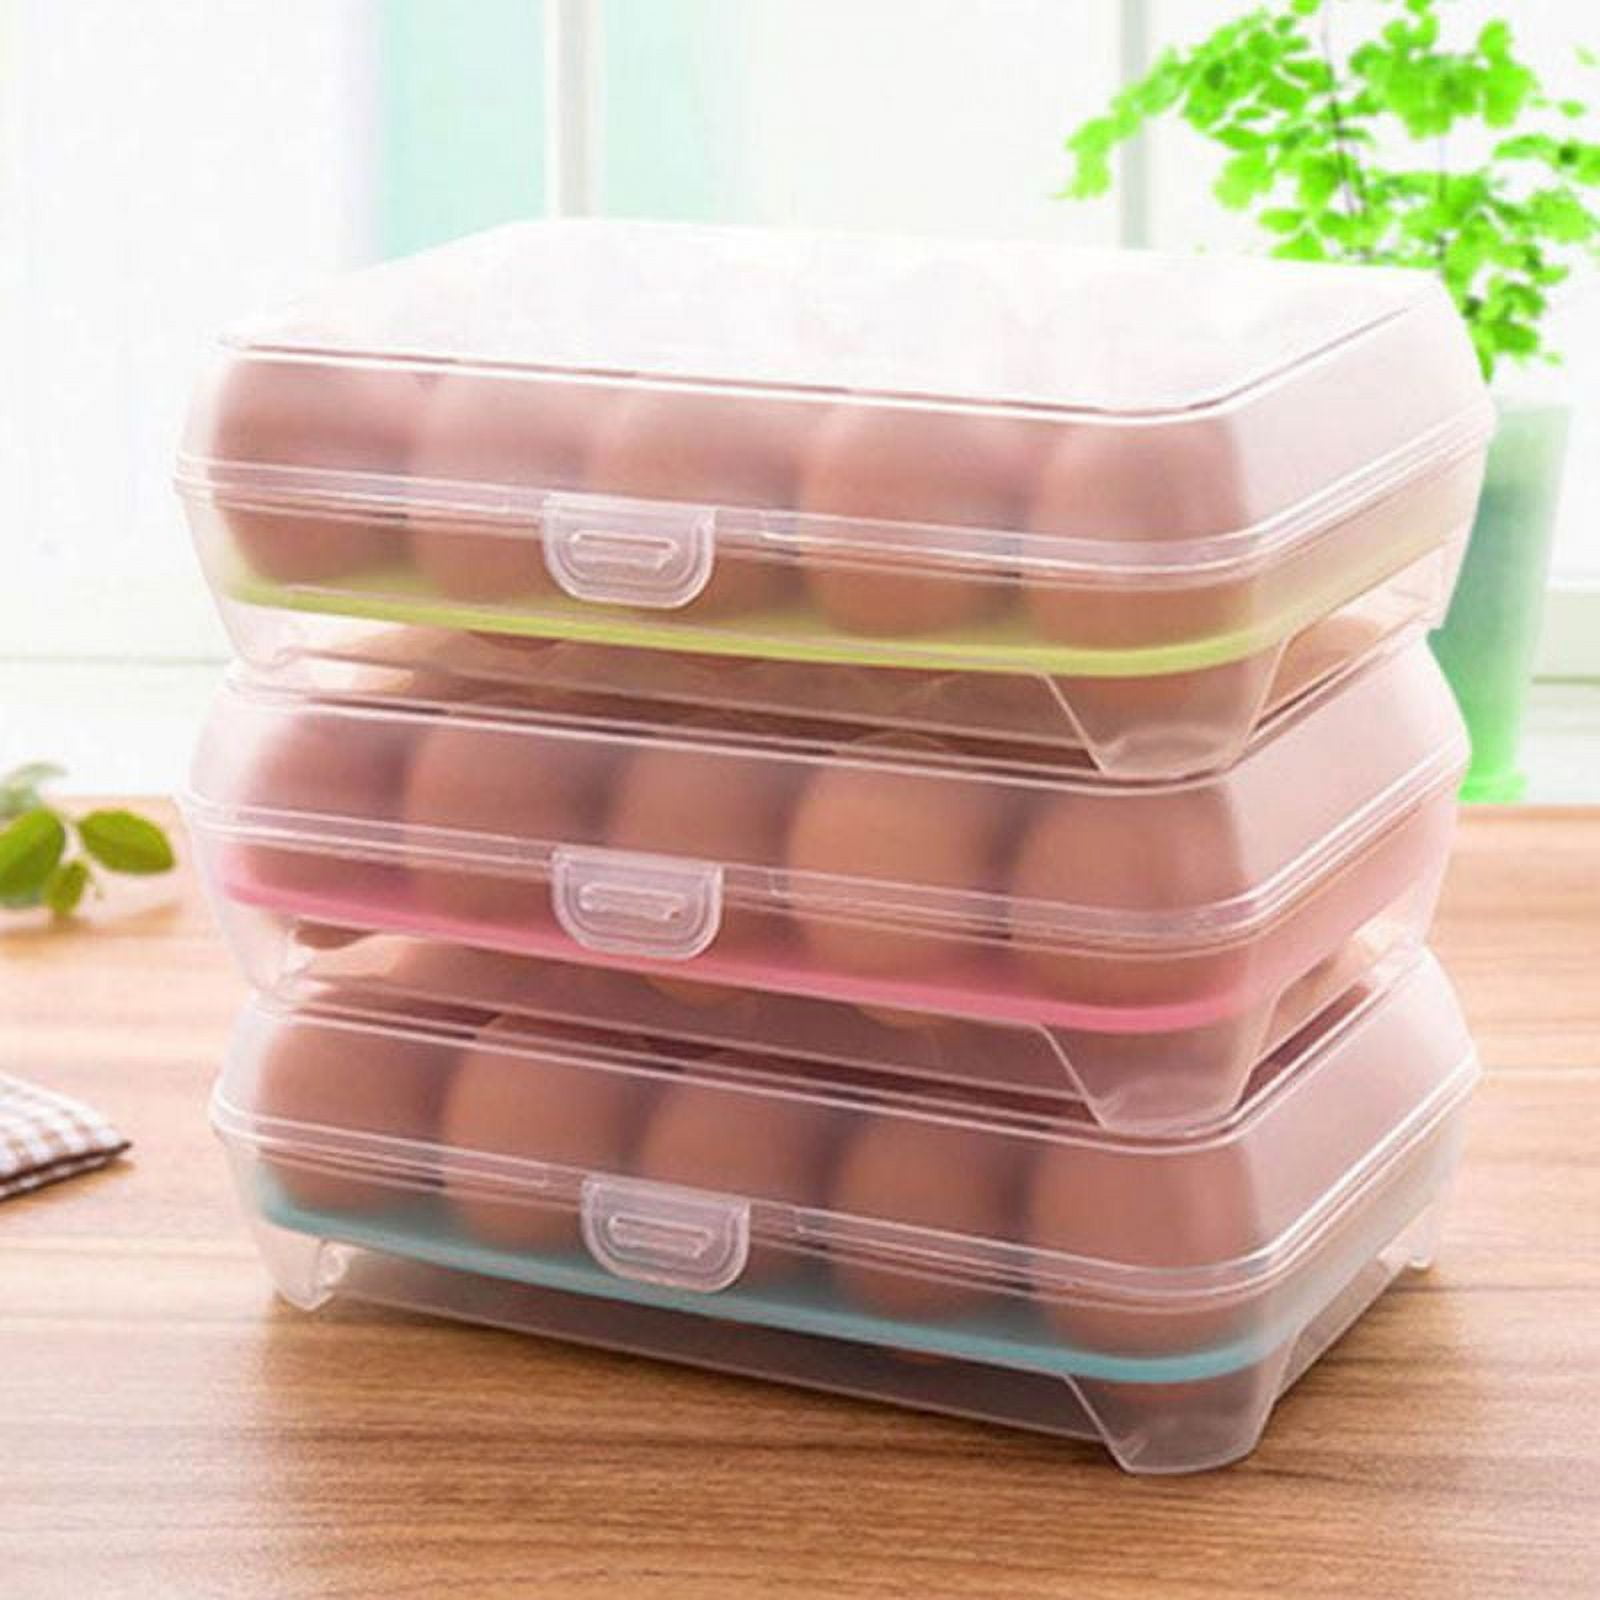 vacane Plastic Egg Holder for Refrigerator,Stackable Egg Holder Clear Tray  with Lid,BPA-Free Egg